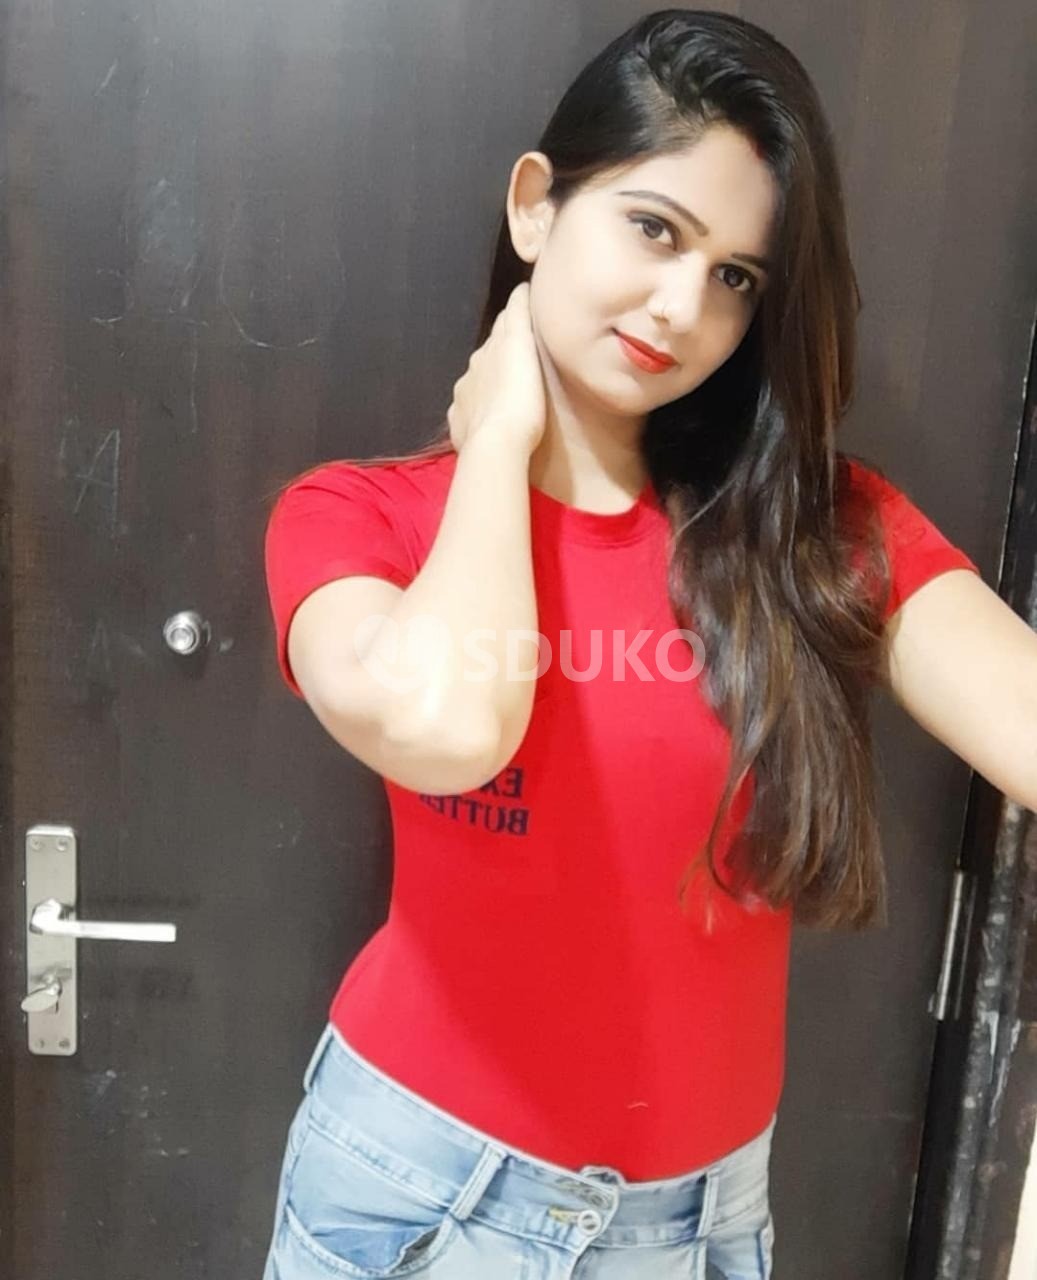 Ranchi ☎️ VIPLOW PRICE (kavya) ESCORT FULL HARD FUCK WITH NAUGHTY IF YOU WANT TO FUCK MY PUSSY WITH BIG BOOBS GIRLS-